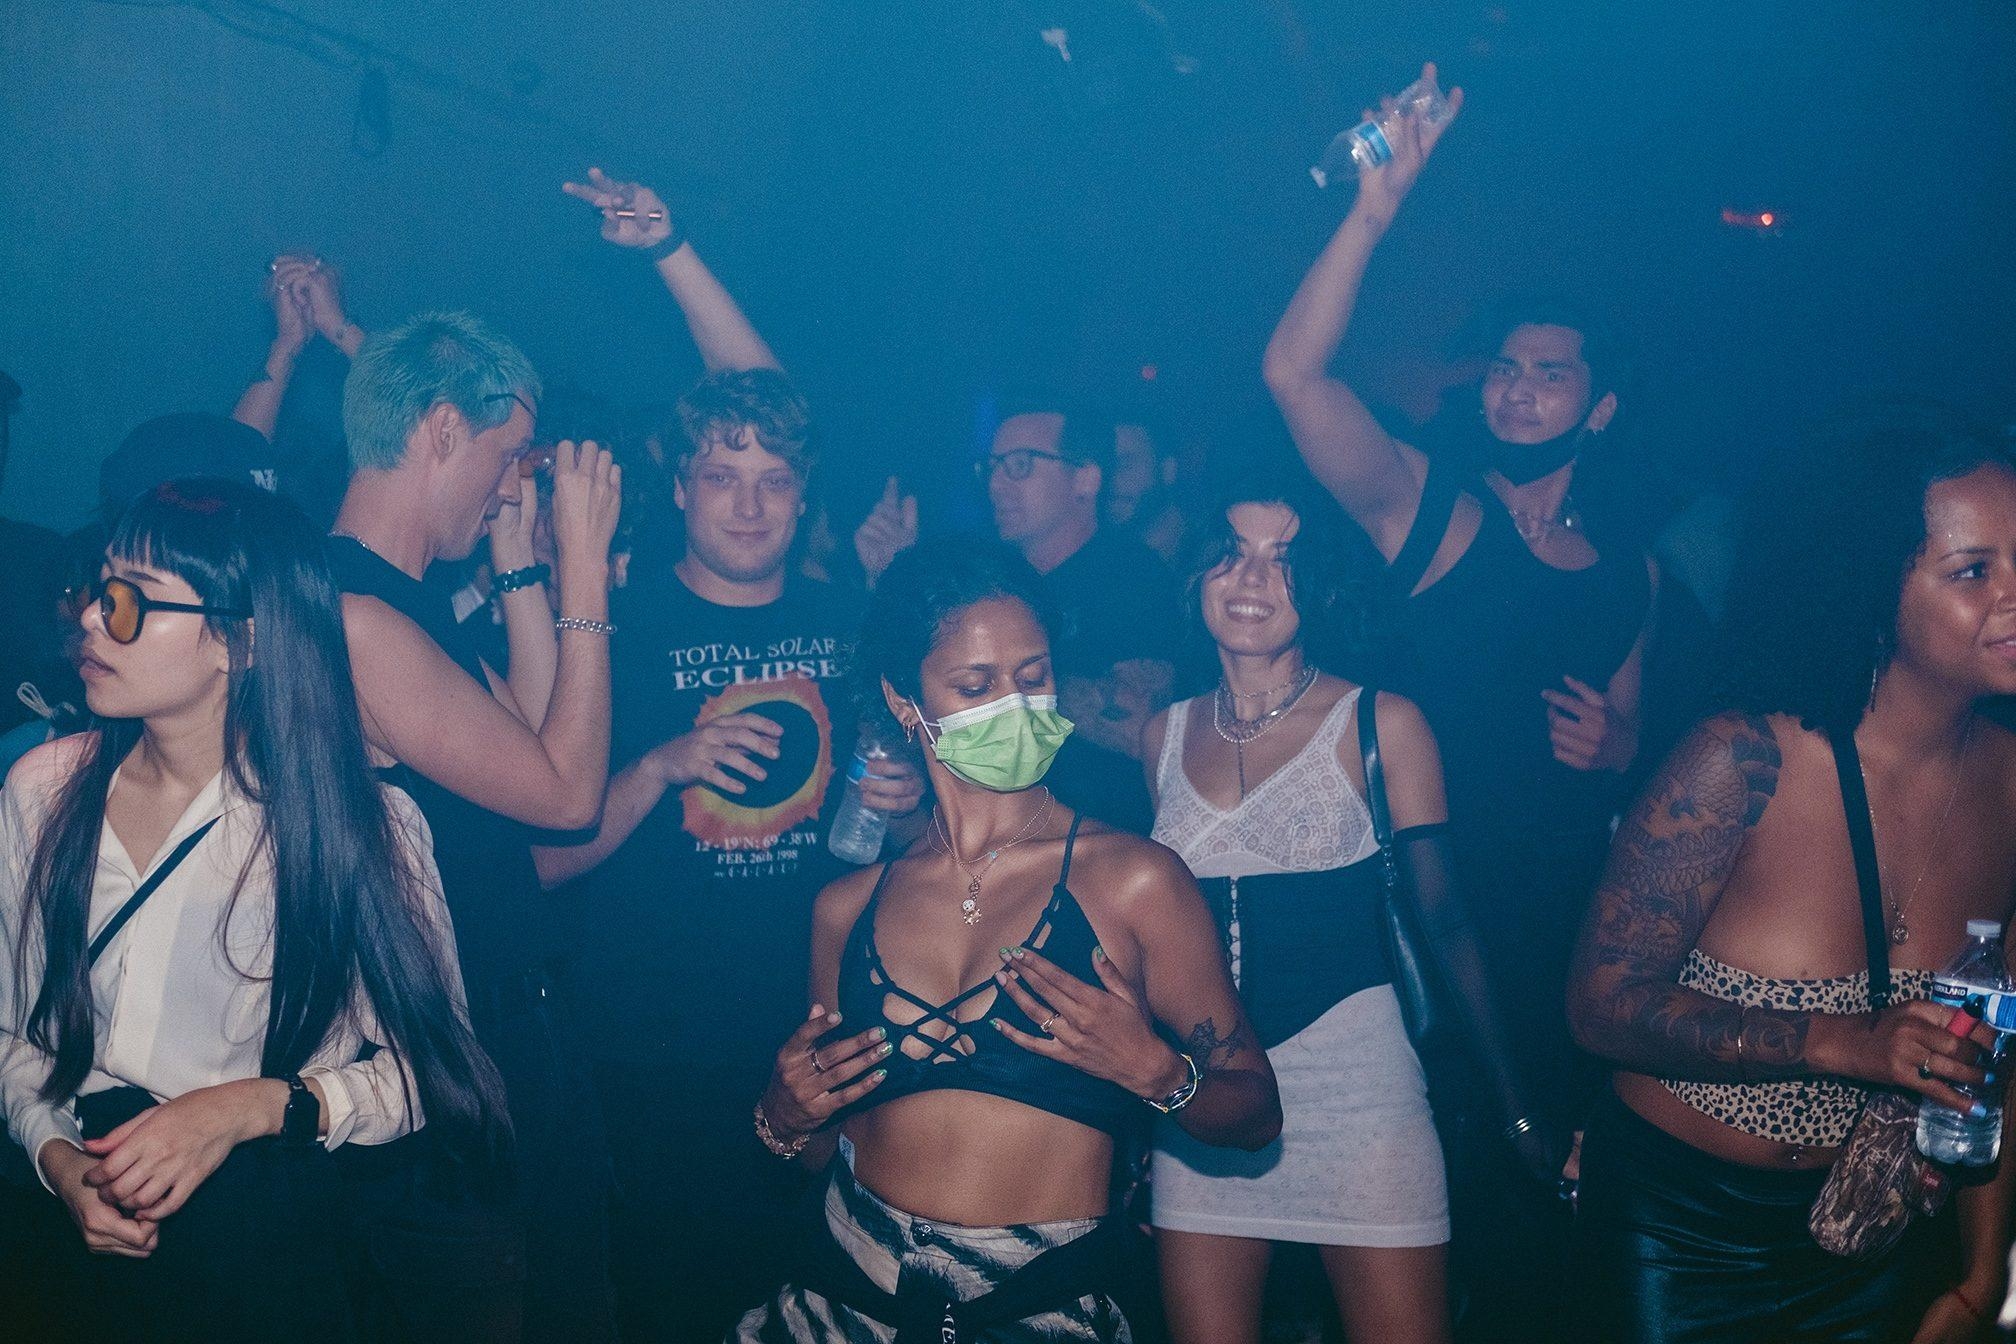 Wild Wild West After the pandemic, LAs rave underground bounces back stronger than ever - Features